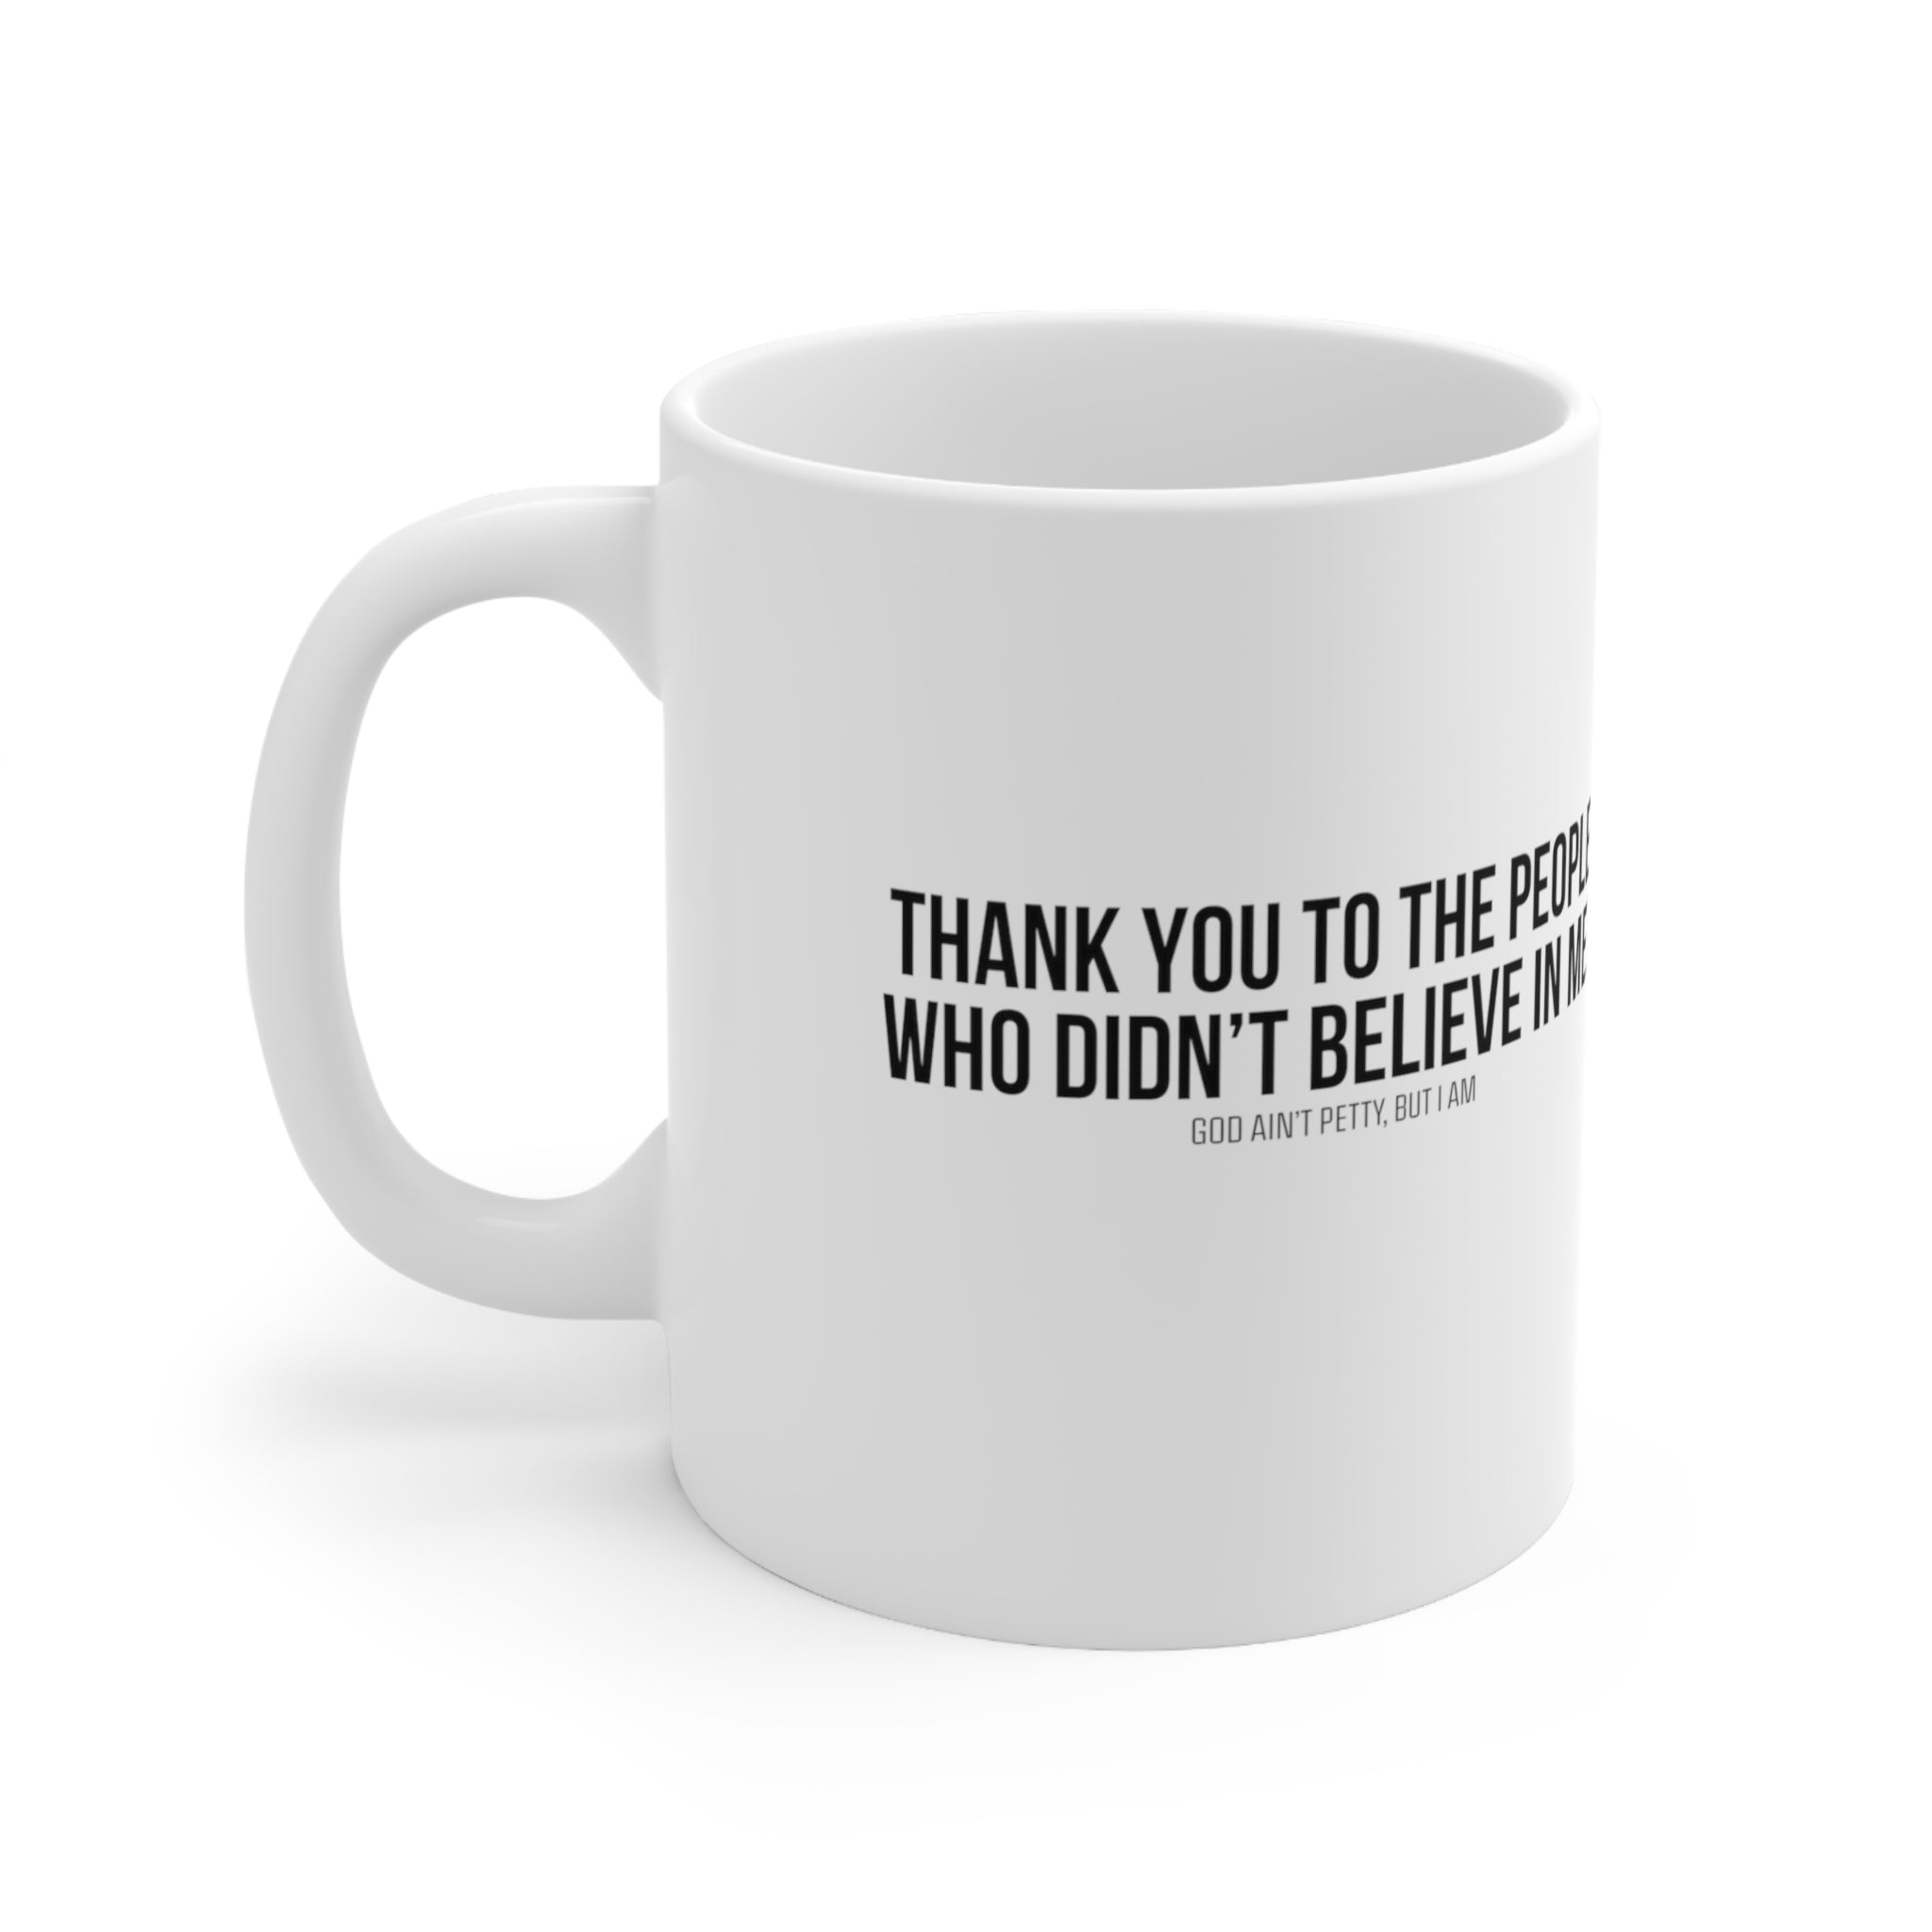 THANK YOU TO THE PEOPLE WHO DIDN'T BELIEVE IN ME Mug 11oz (White/Black)-Mug-The Original God Ain't Petty But I Am